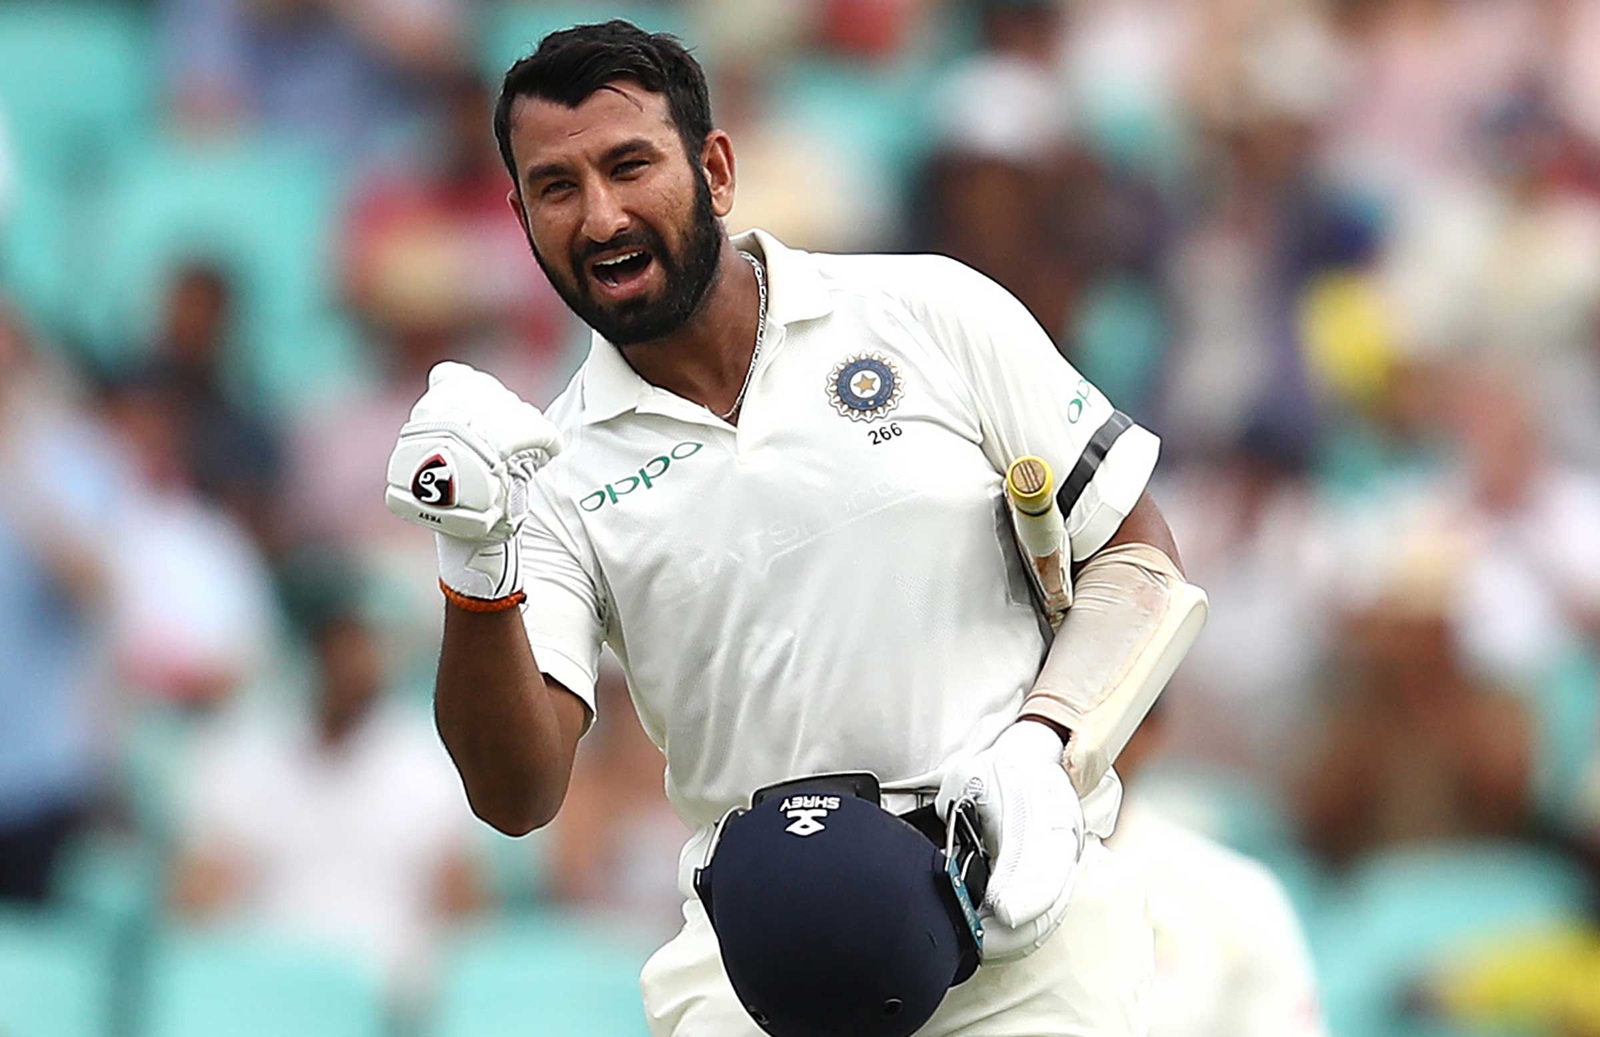 IPL 2021 Auction: Cheteshwar Pujara will be available for 50 Lakh